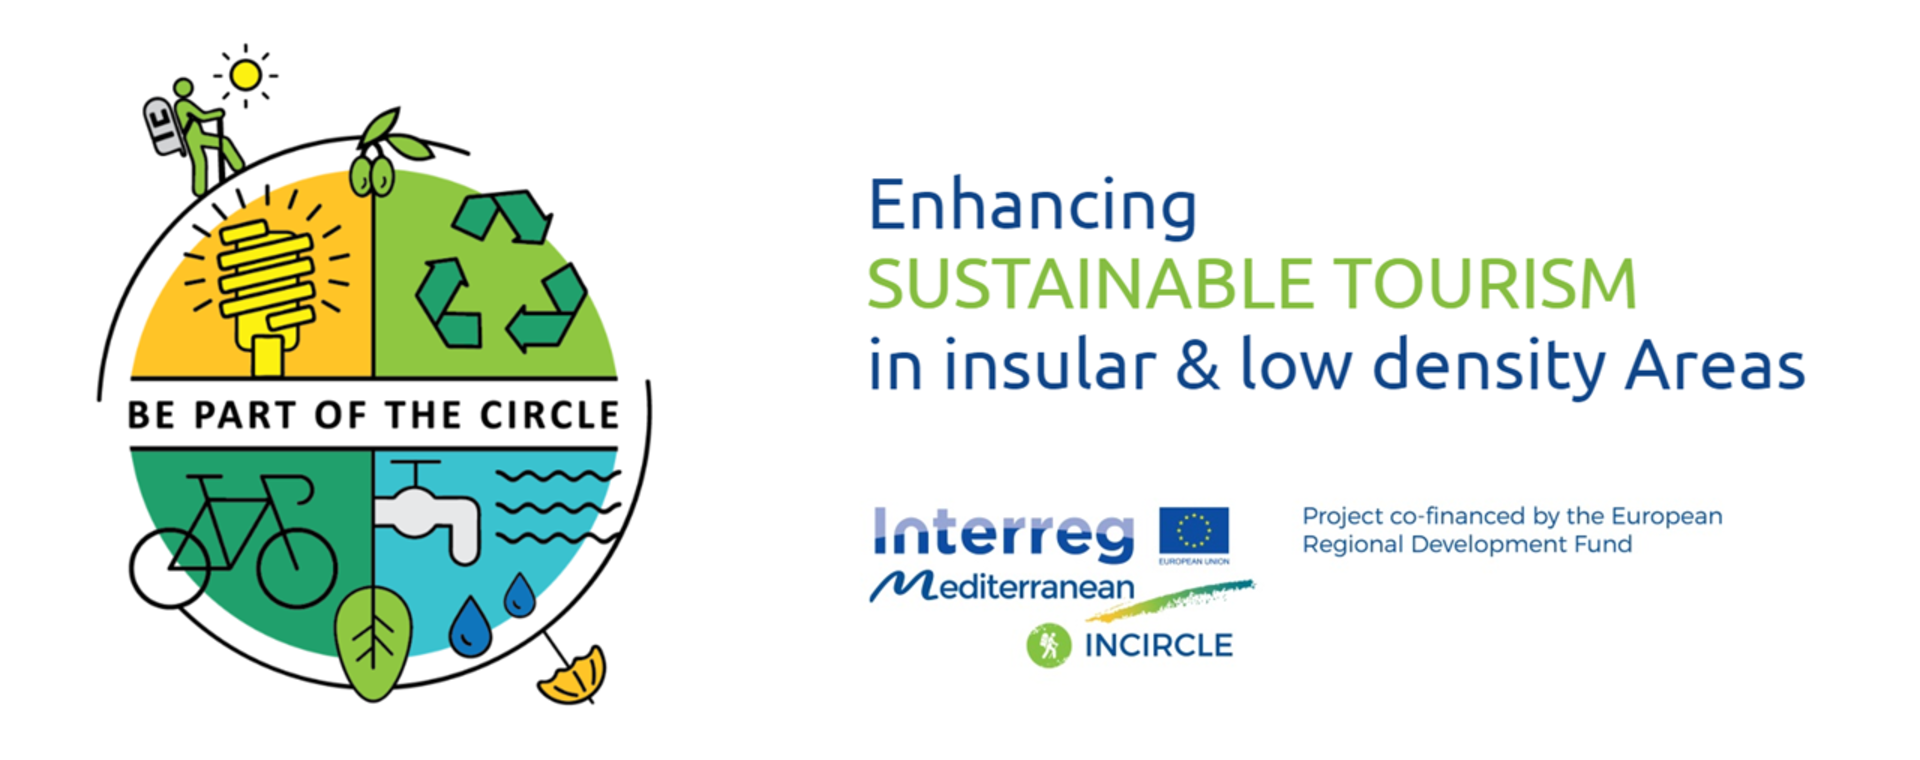 INCIRCLE: new planning tools to reduce the environmental impact of tourism